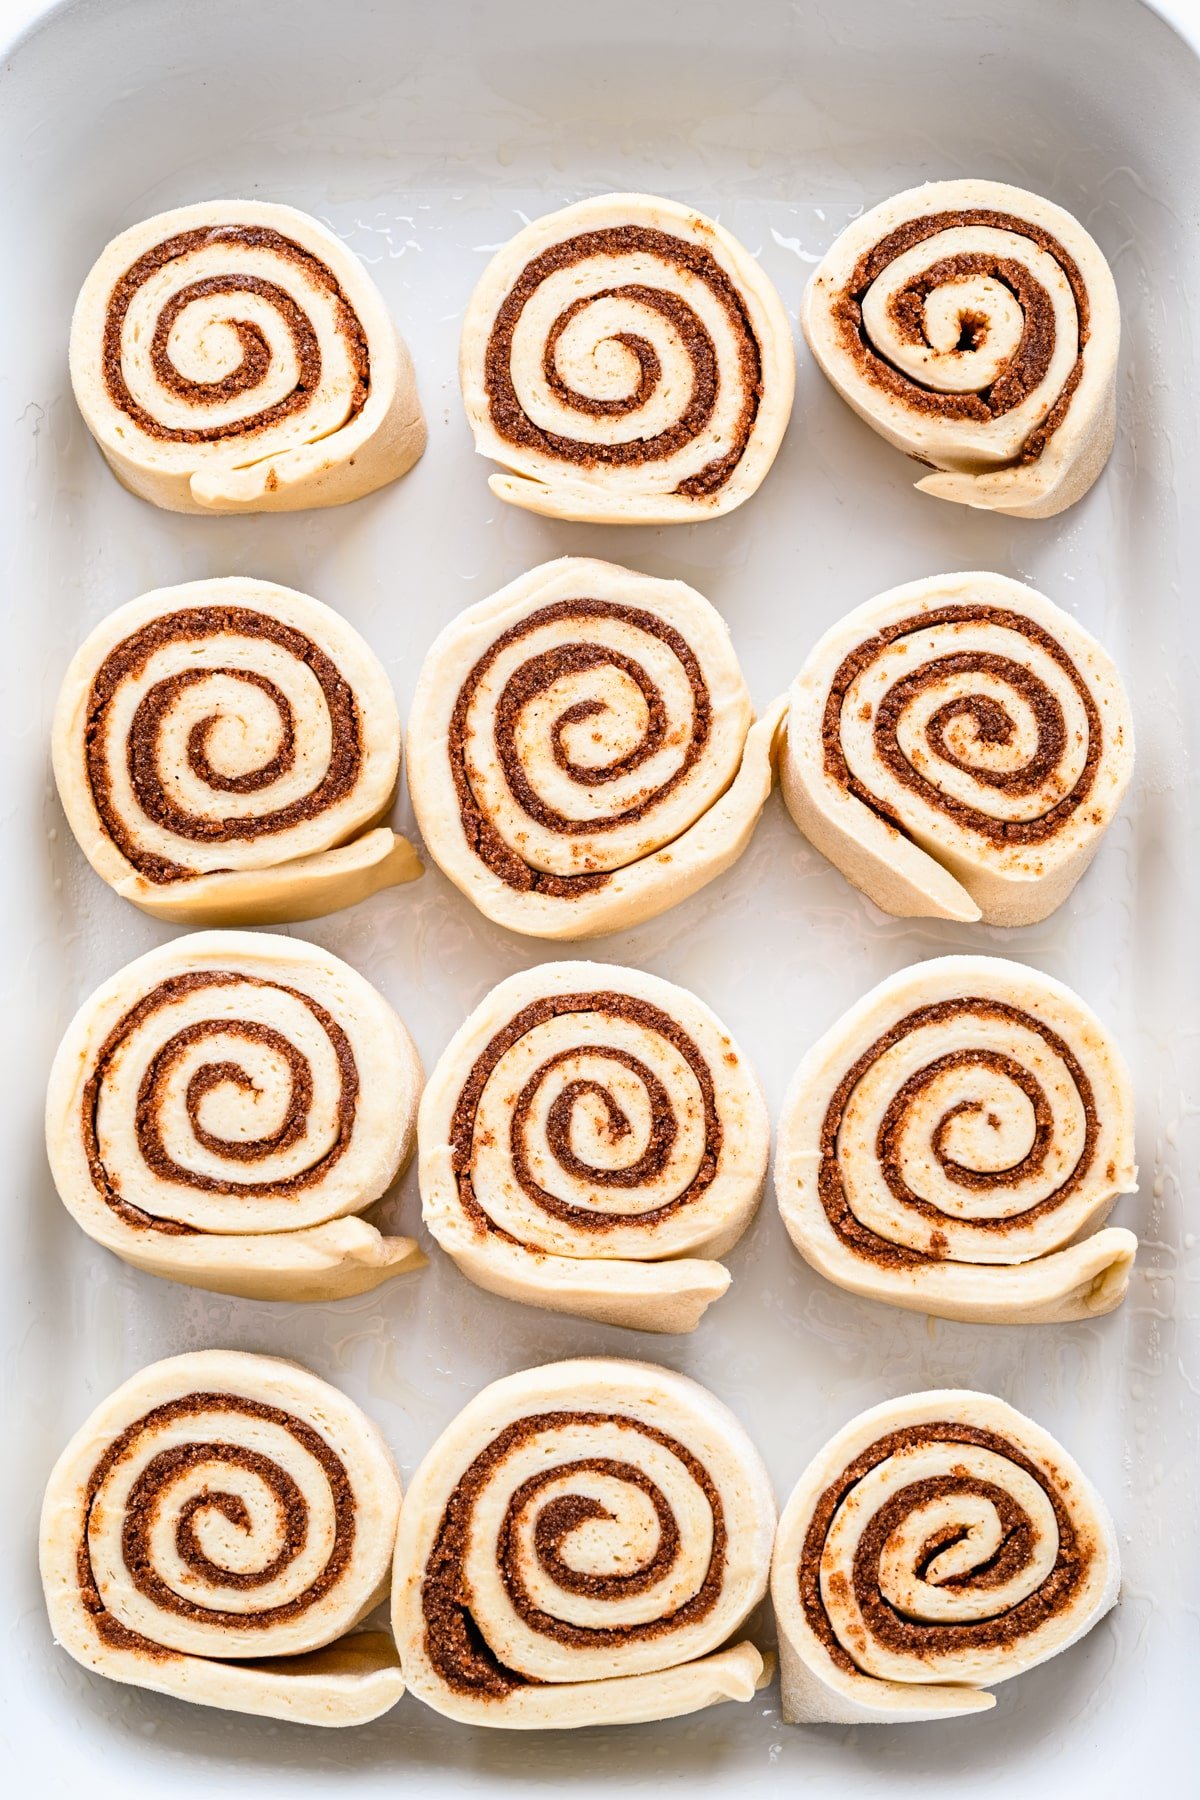 Unbaked cinnamon rolls in a white baking pan. 